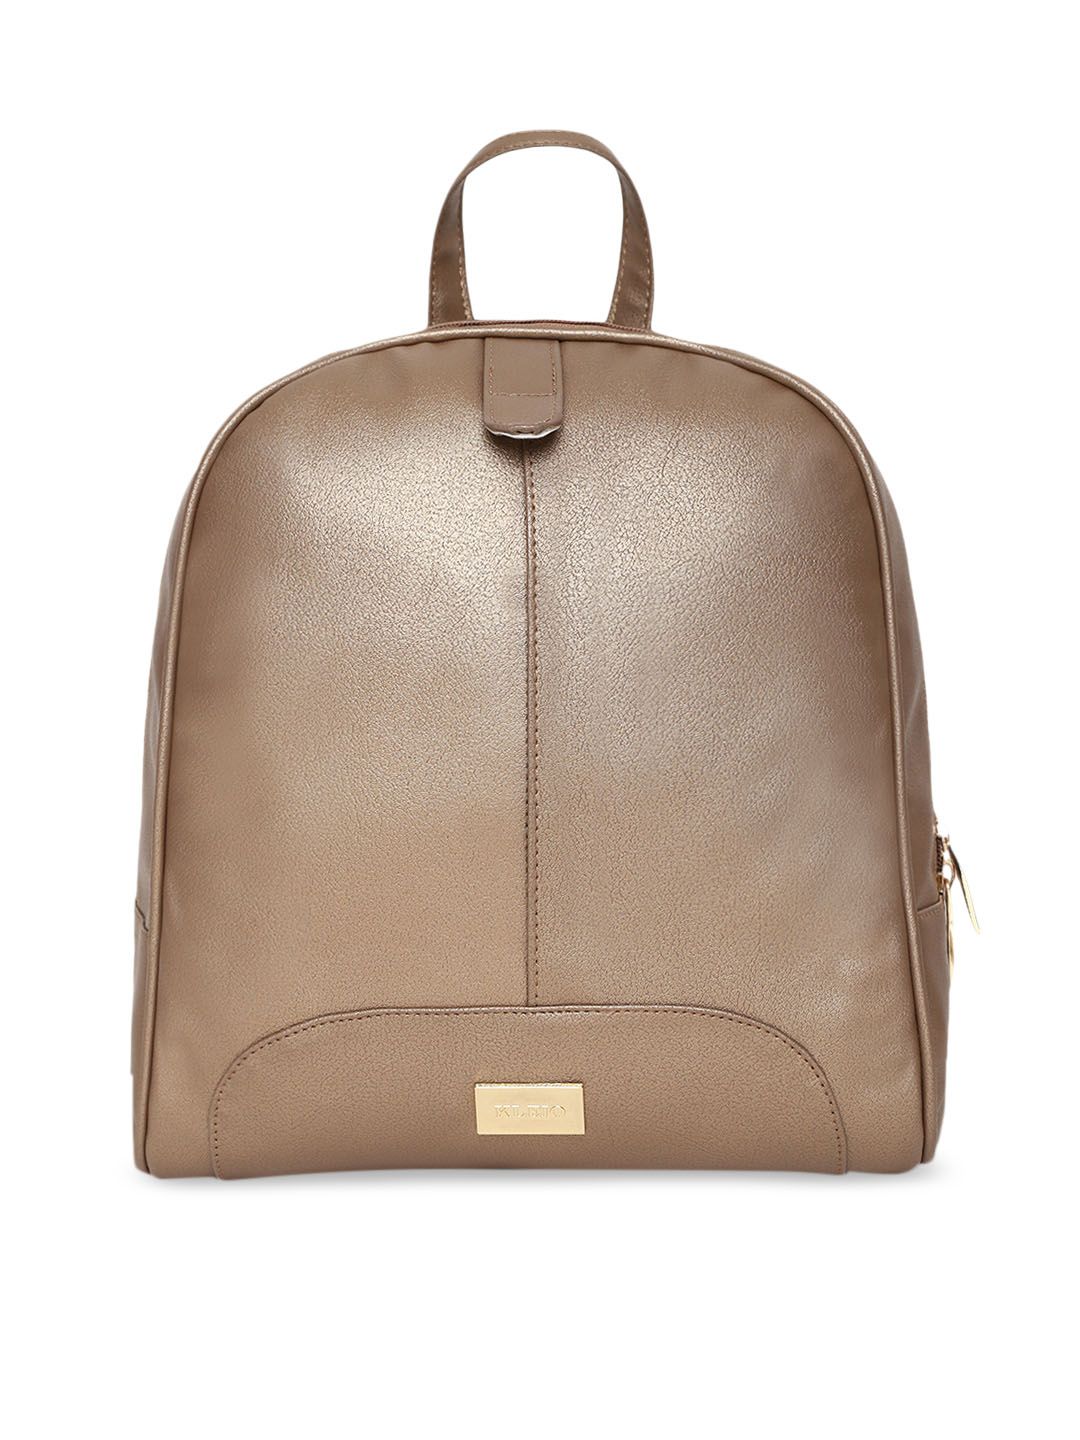 KLEIO Women Copper-Toned Solid Backpack Price in India